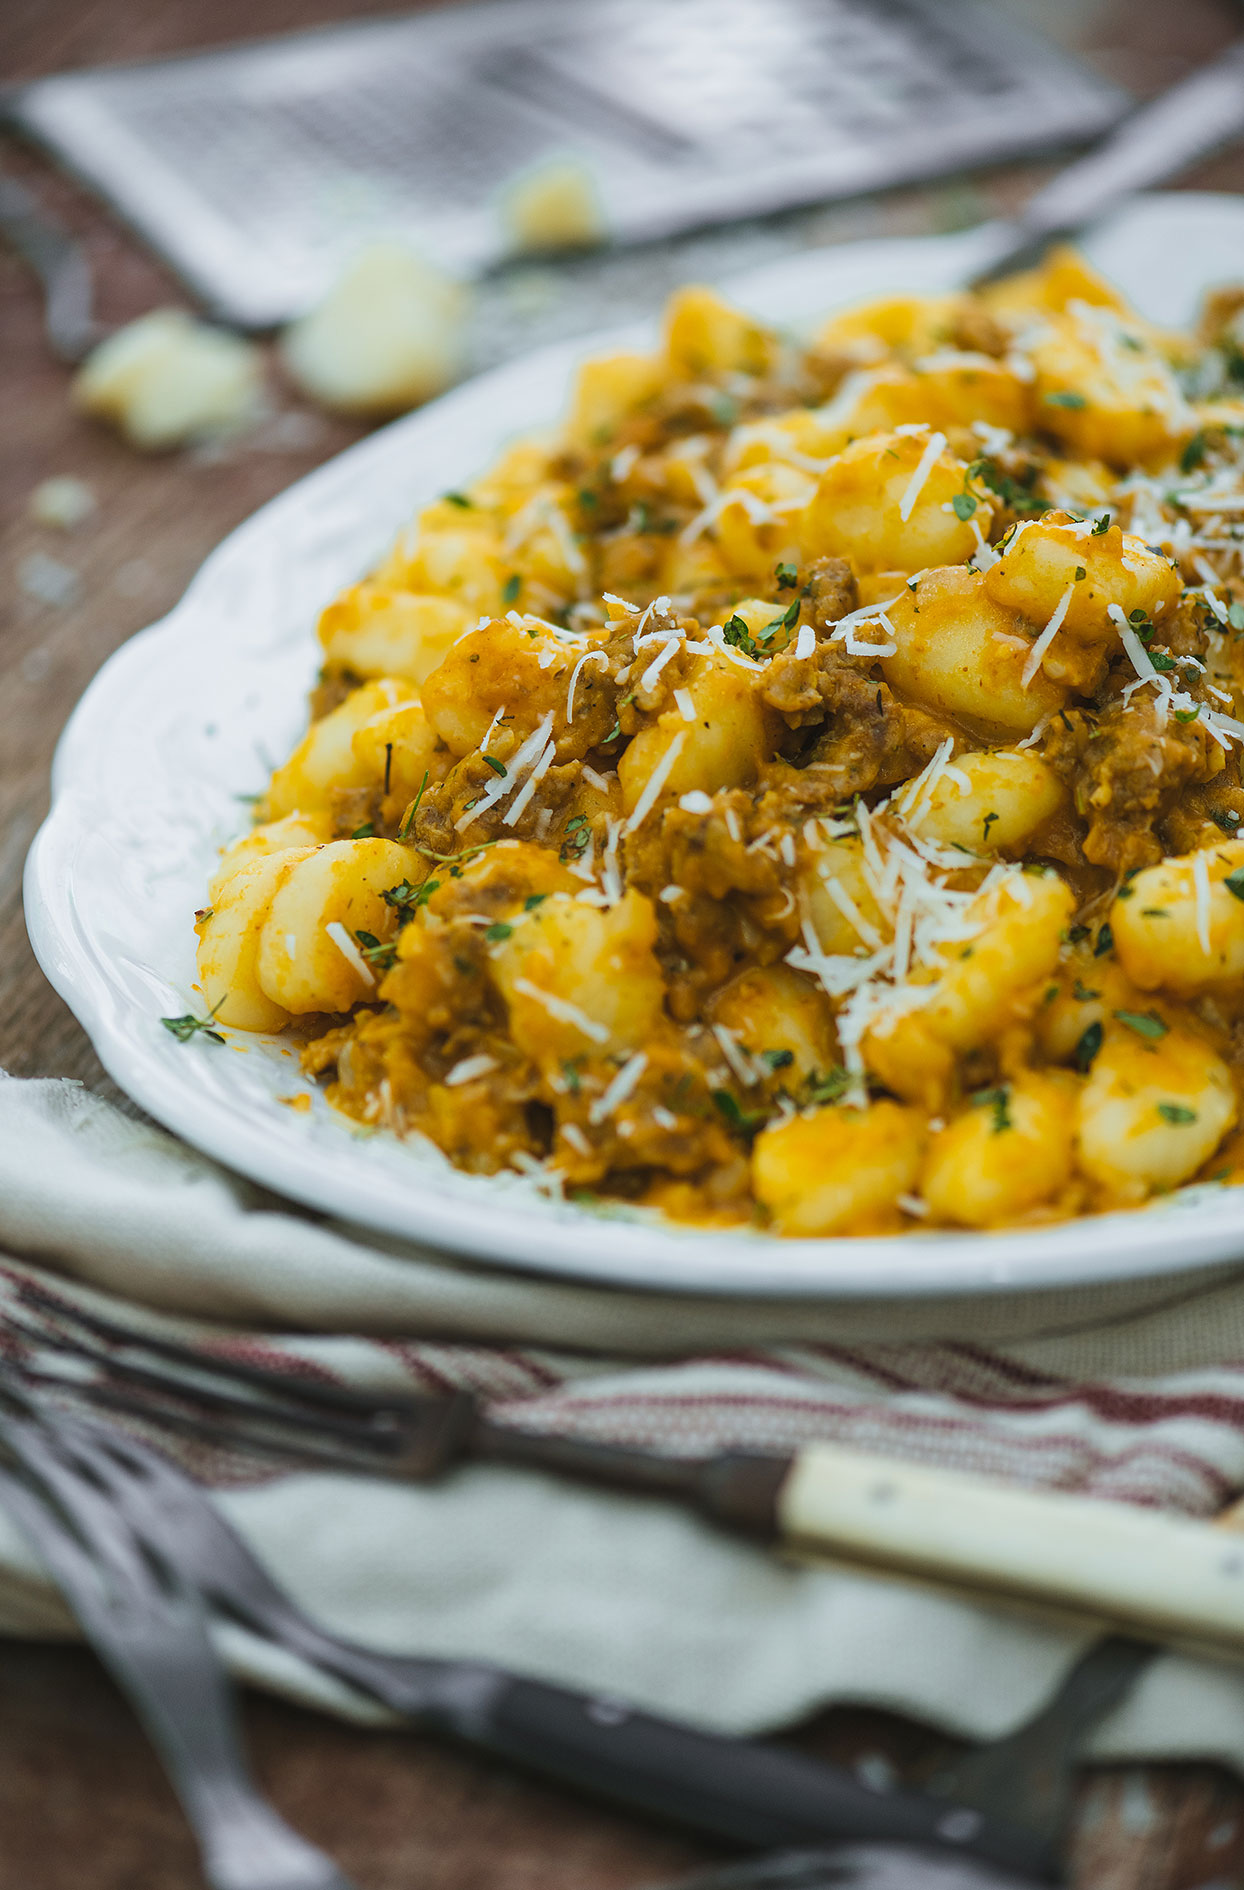 Gnocchi with pumpkin and fine herbs sausages